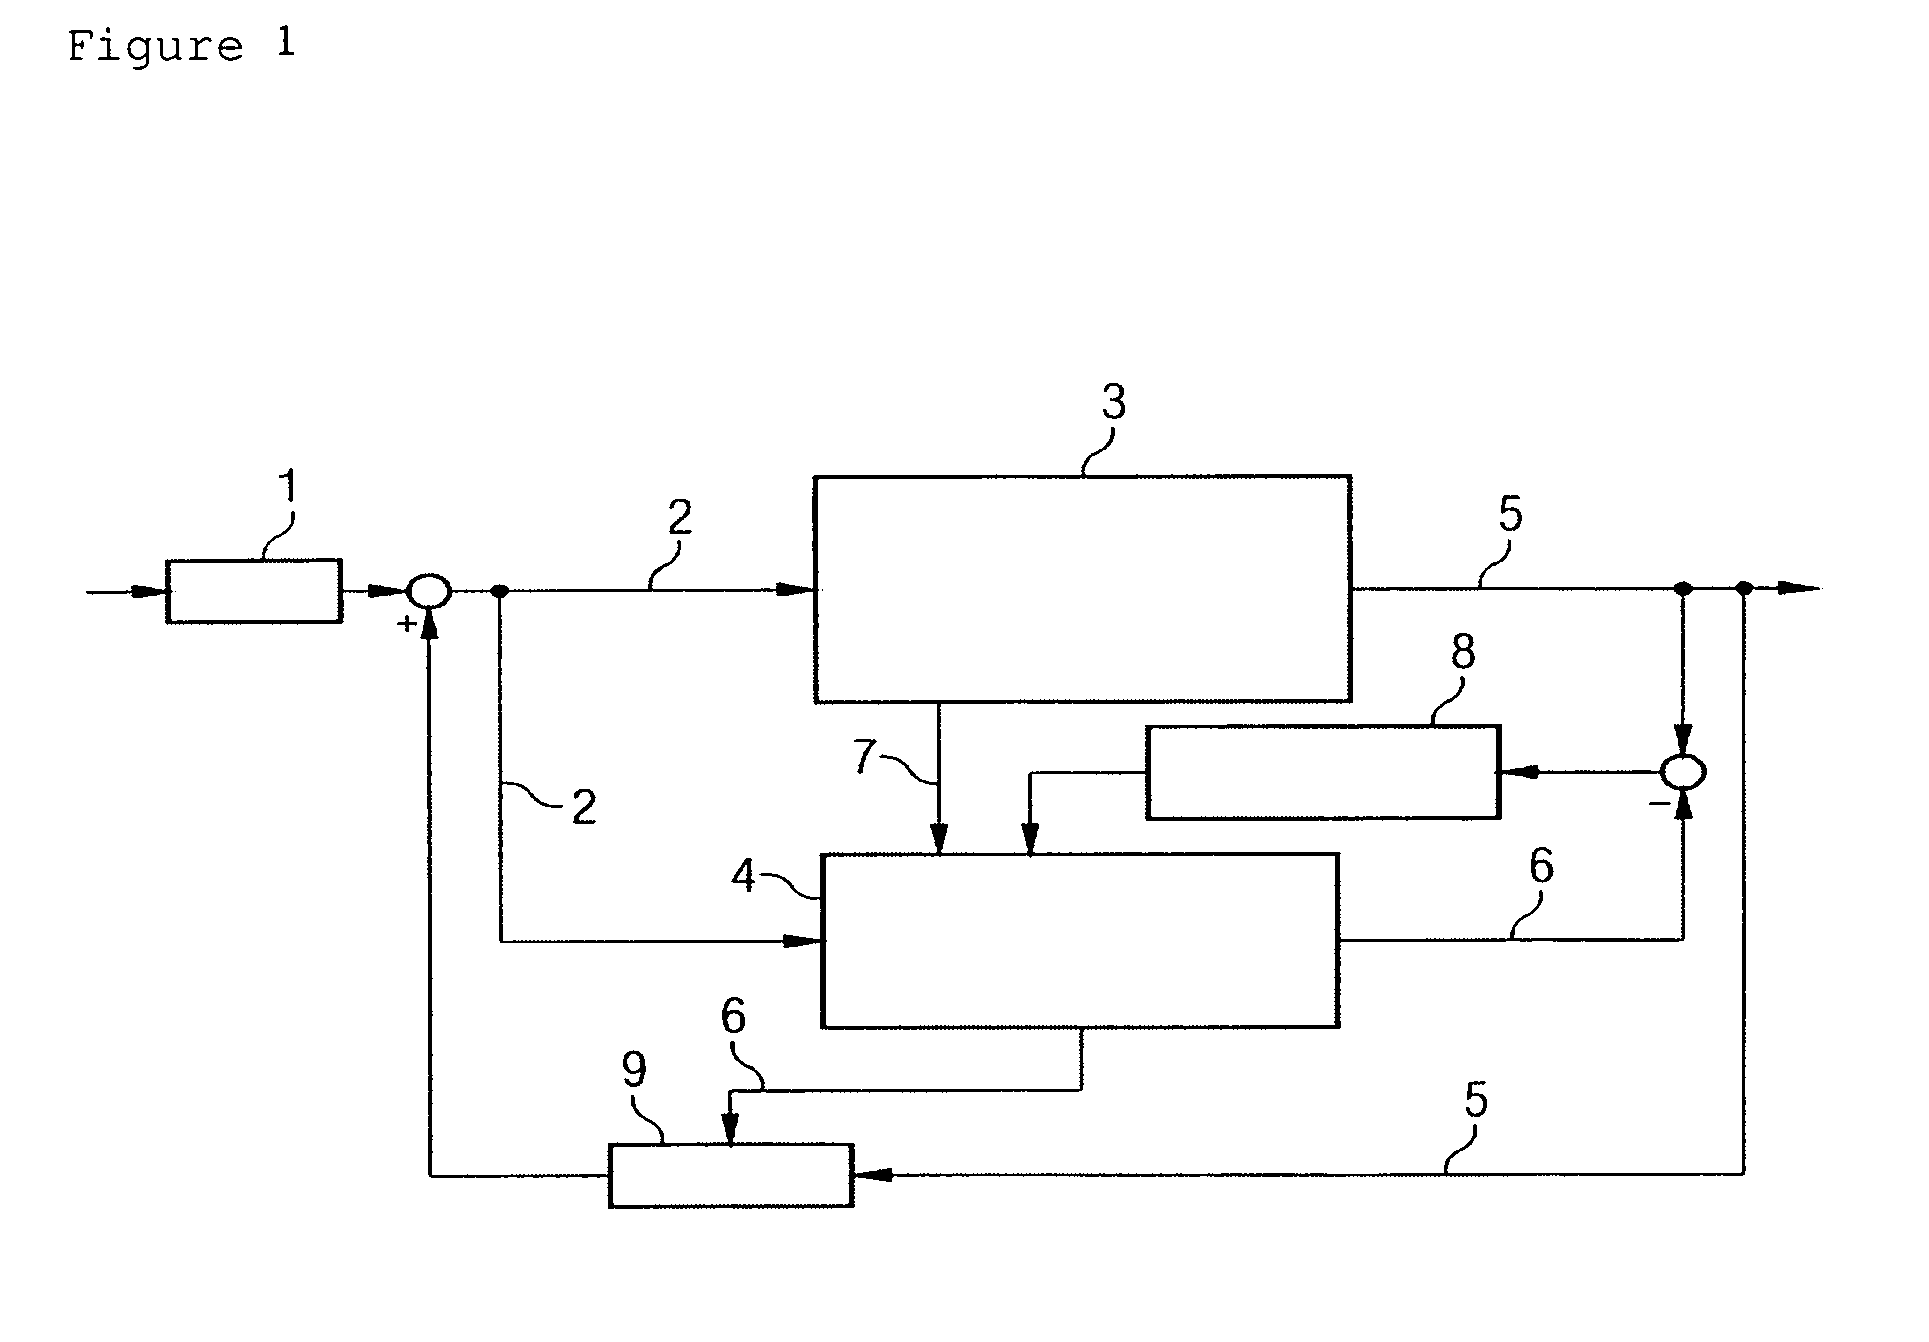 Procedure for regulating the combustion process of an HCCI internal combustion engine